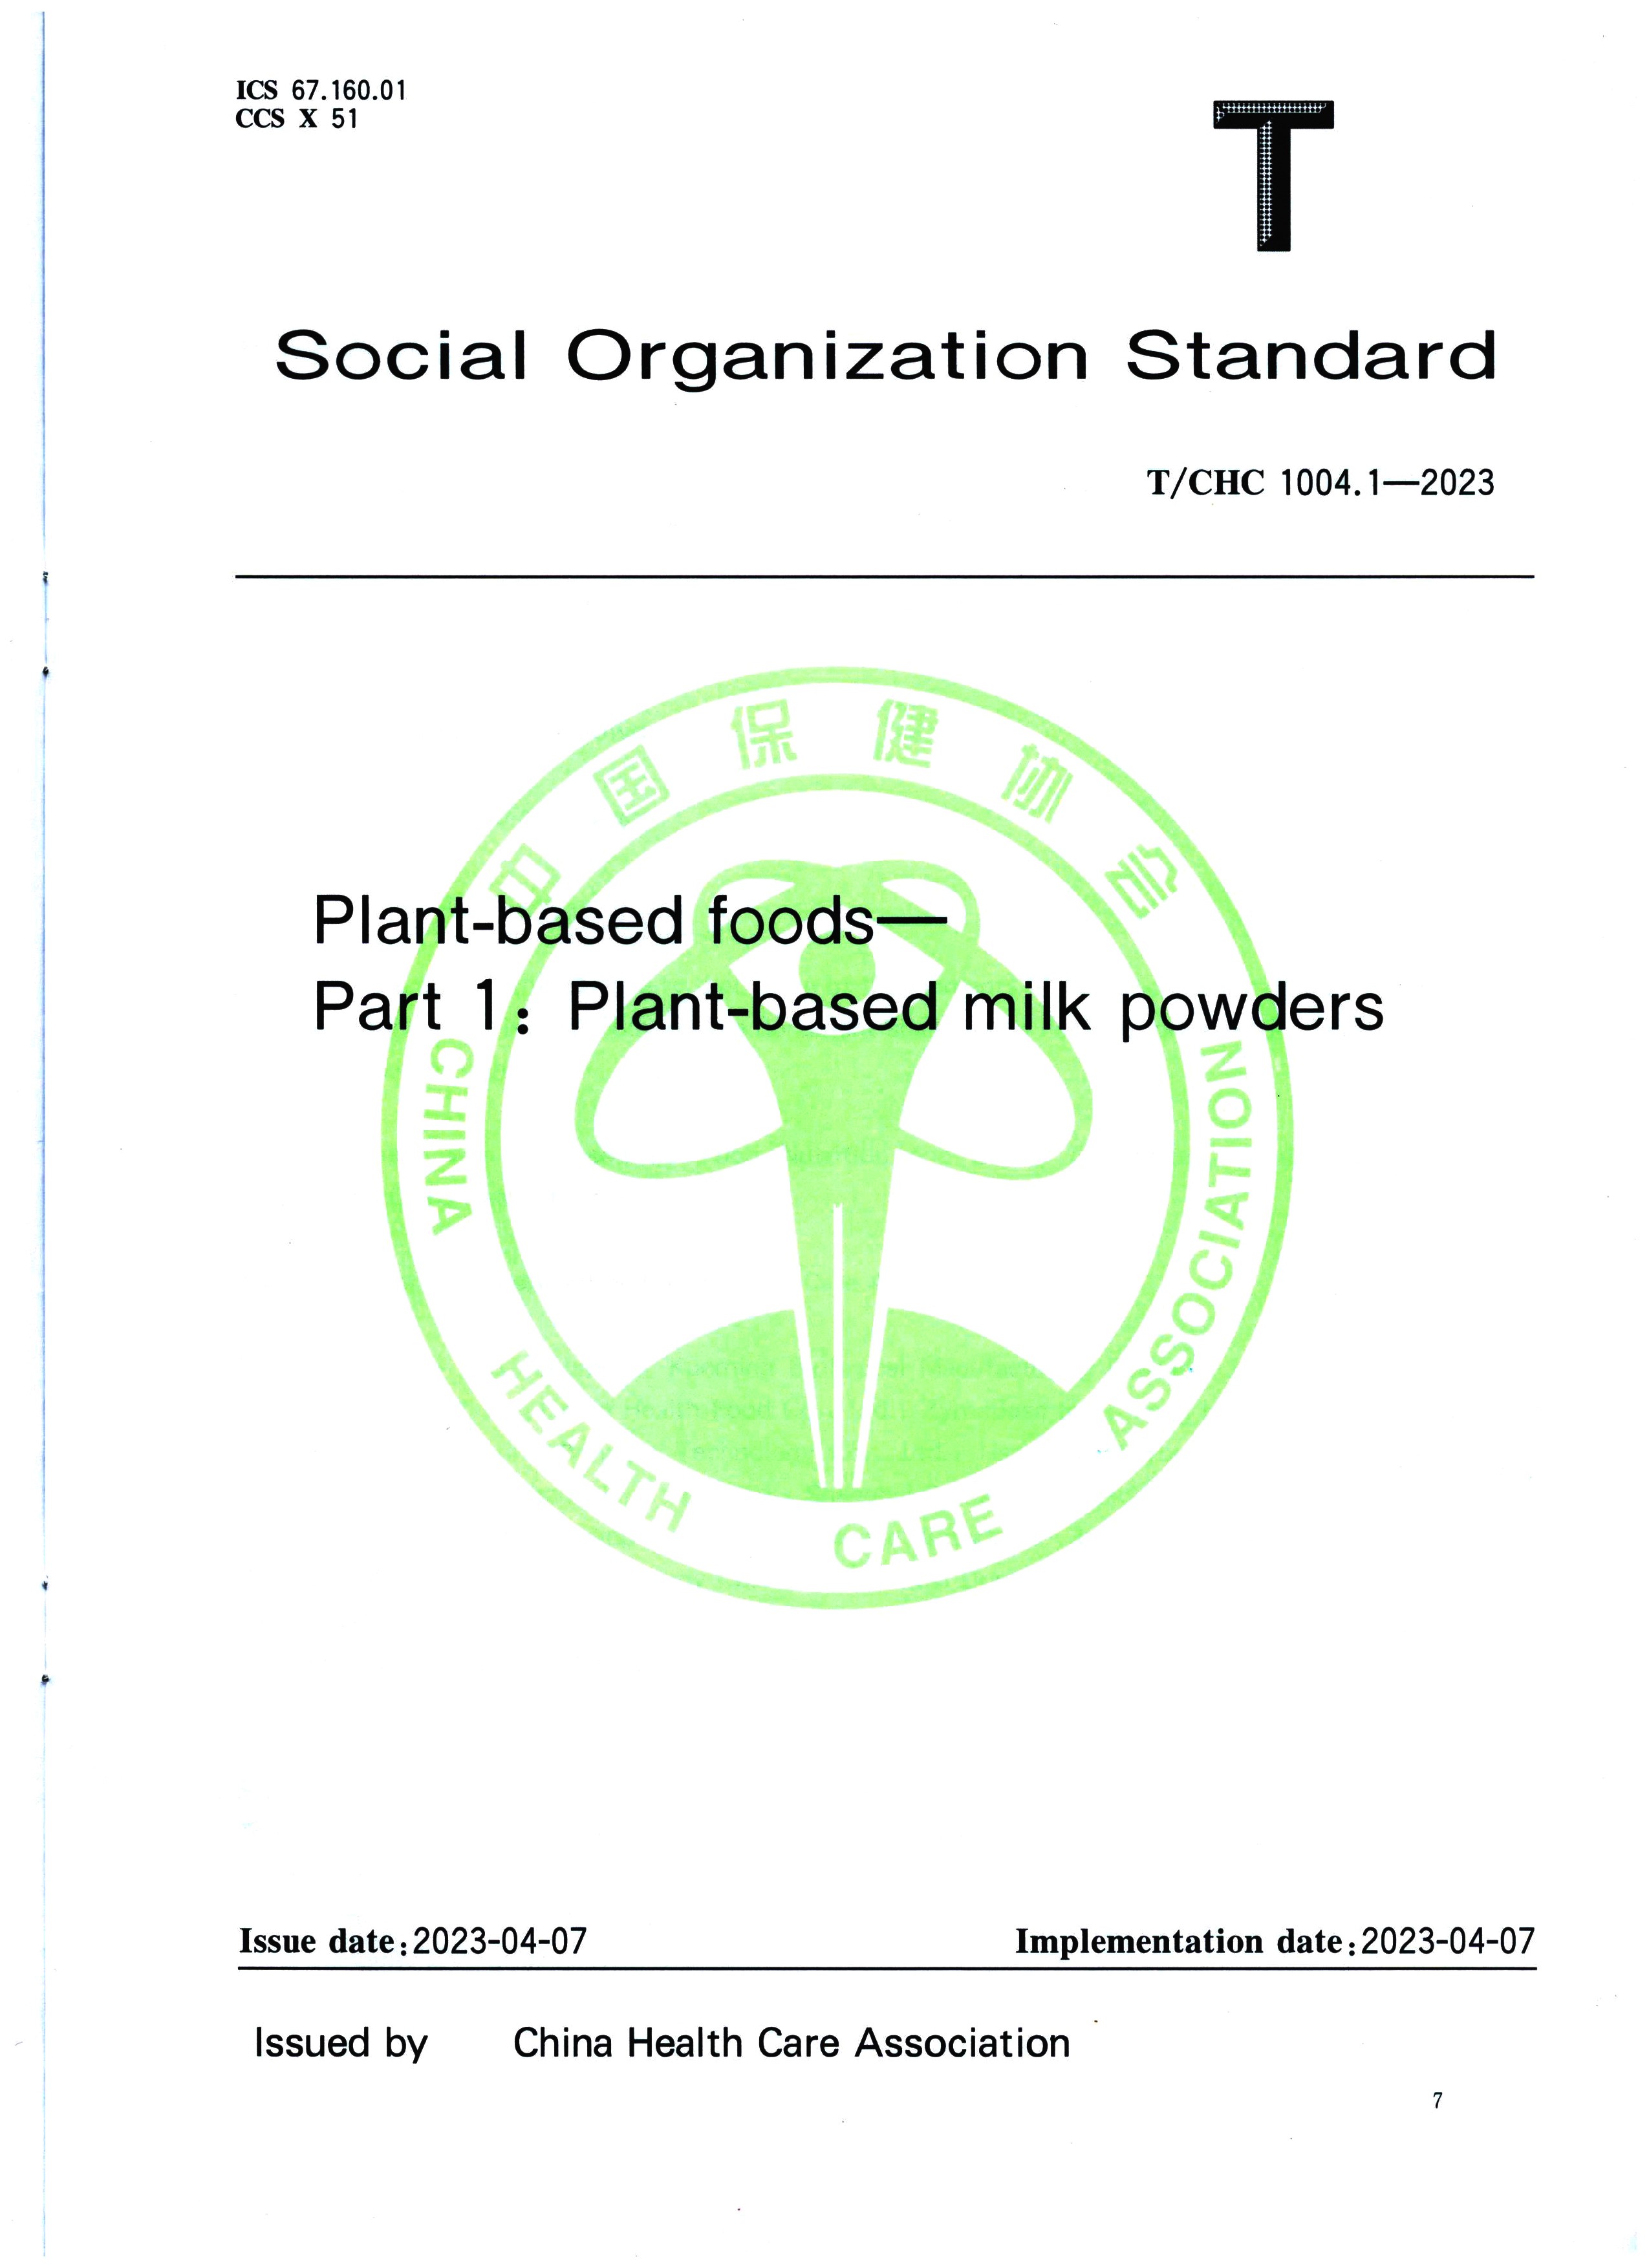 The group standard of "Plant-based Food Part 1 Plant-based Milk Powder" published by China Standards Press was officially released